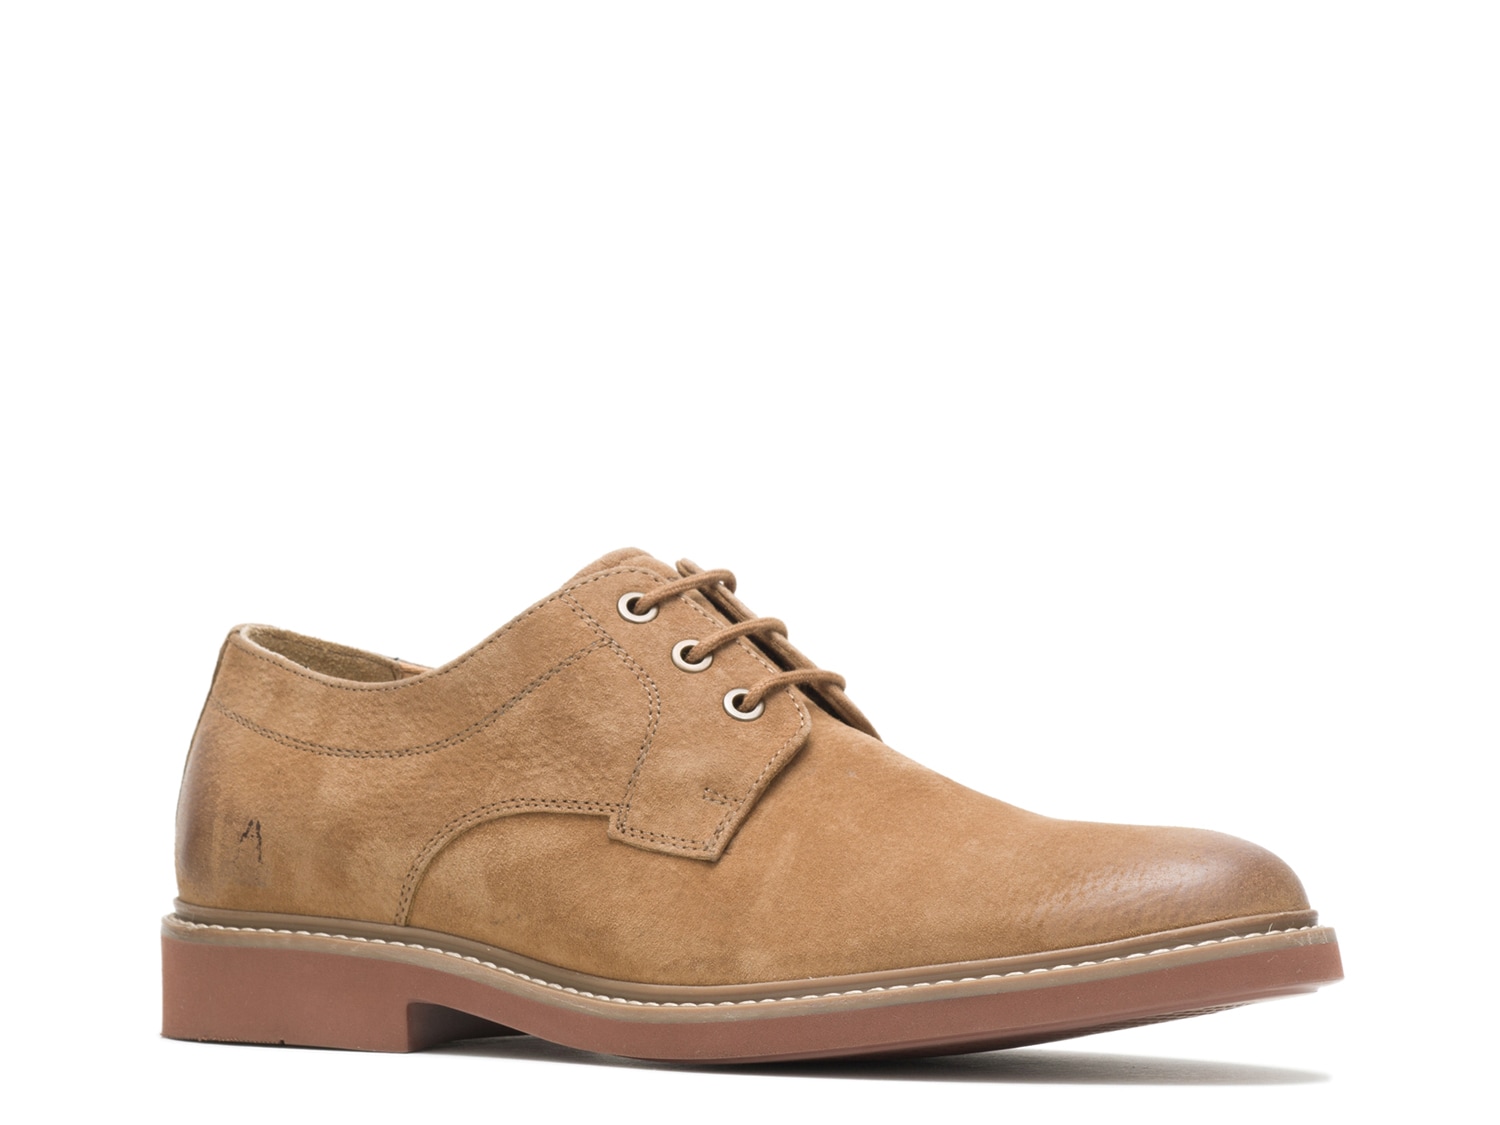 Hush Puppies Detroit Oxford - Free Shipping | DSW